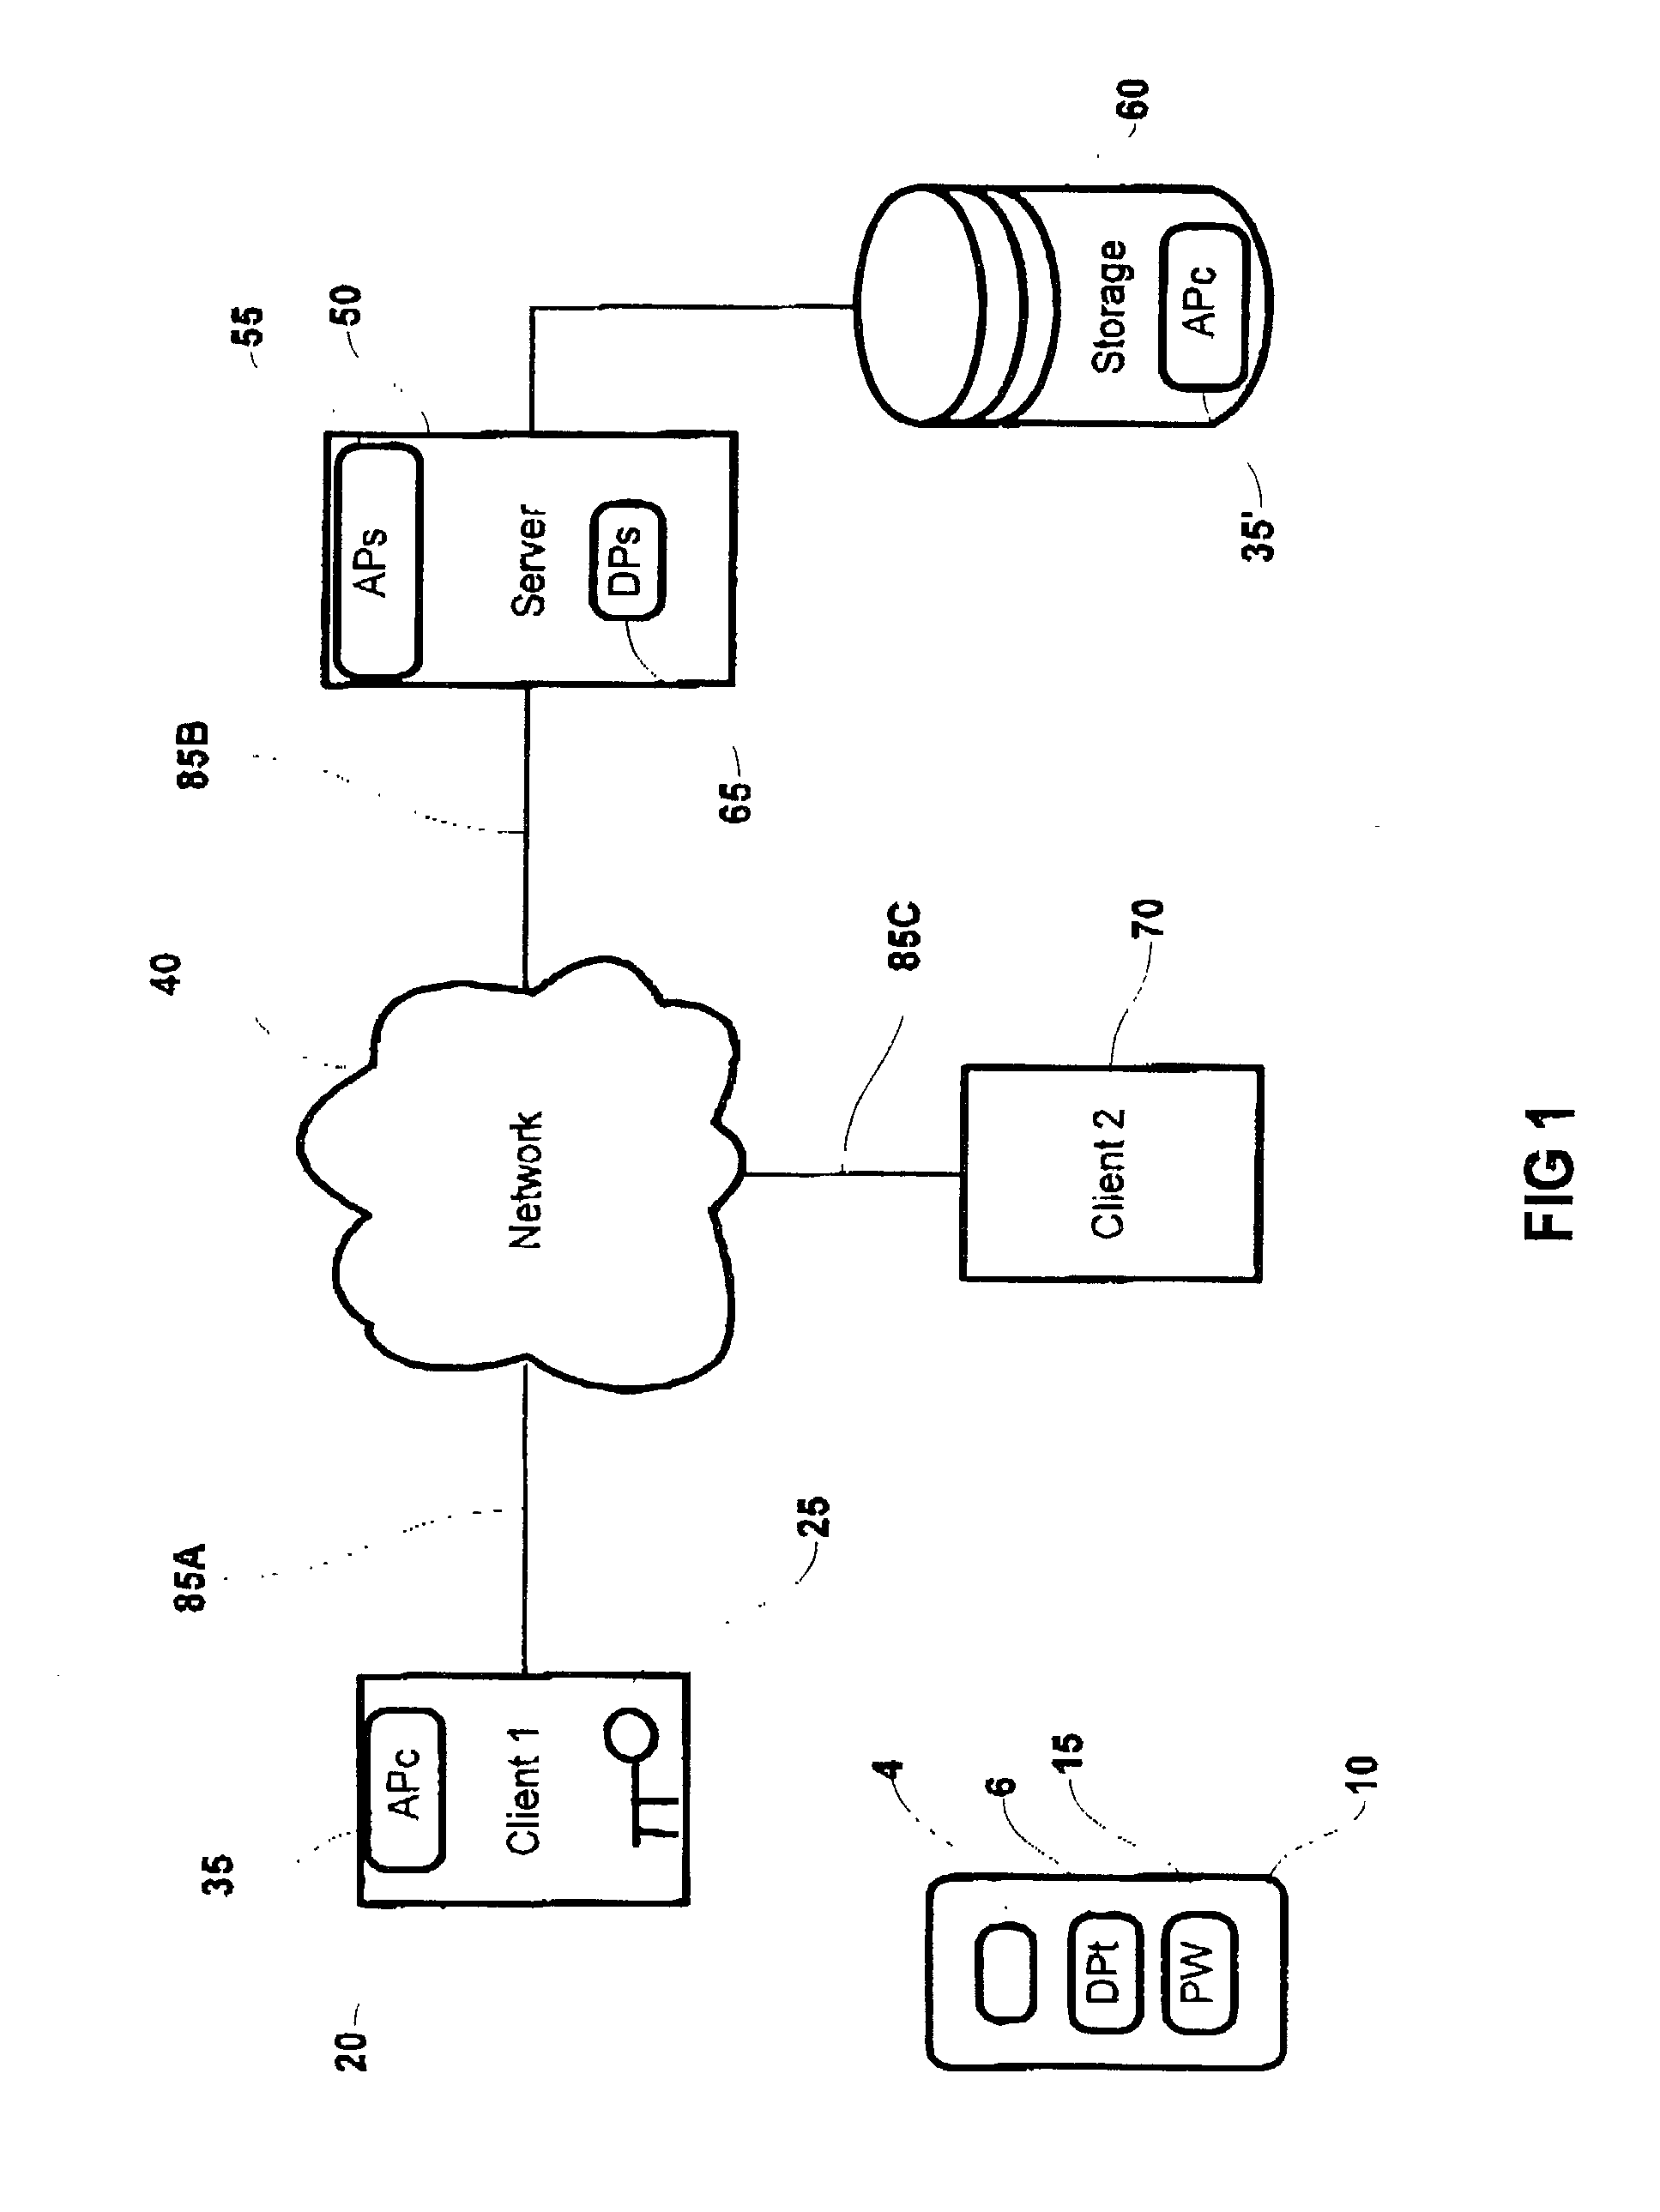 System and method for storage and retrieval of a cryptographic secret from a plurality of network enabled clients